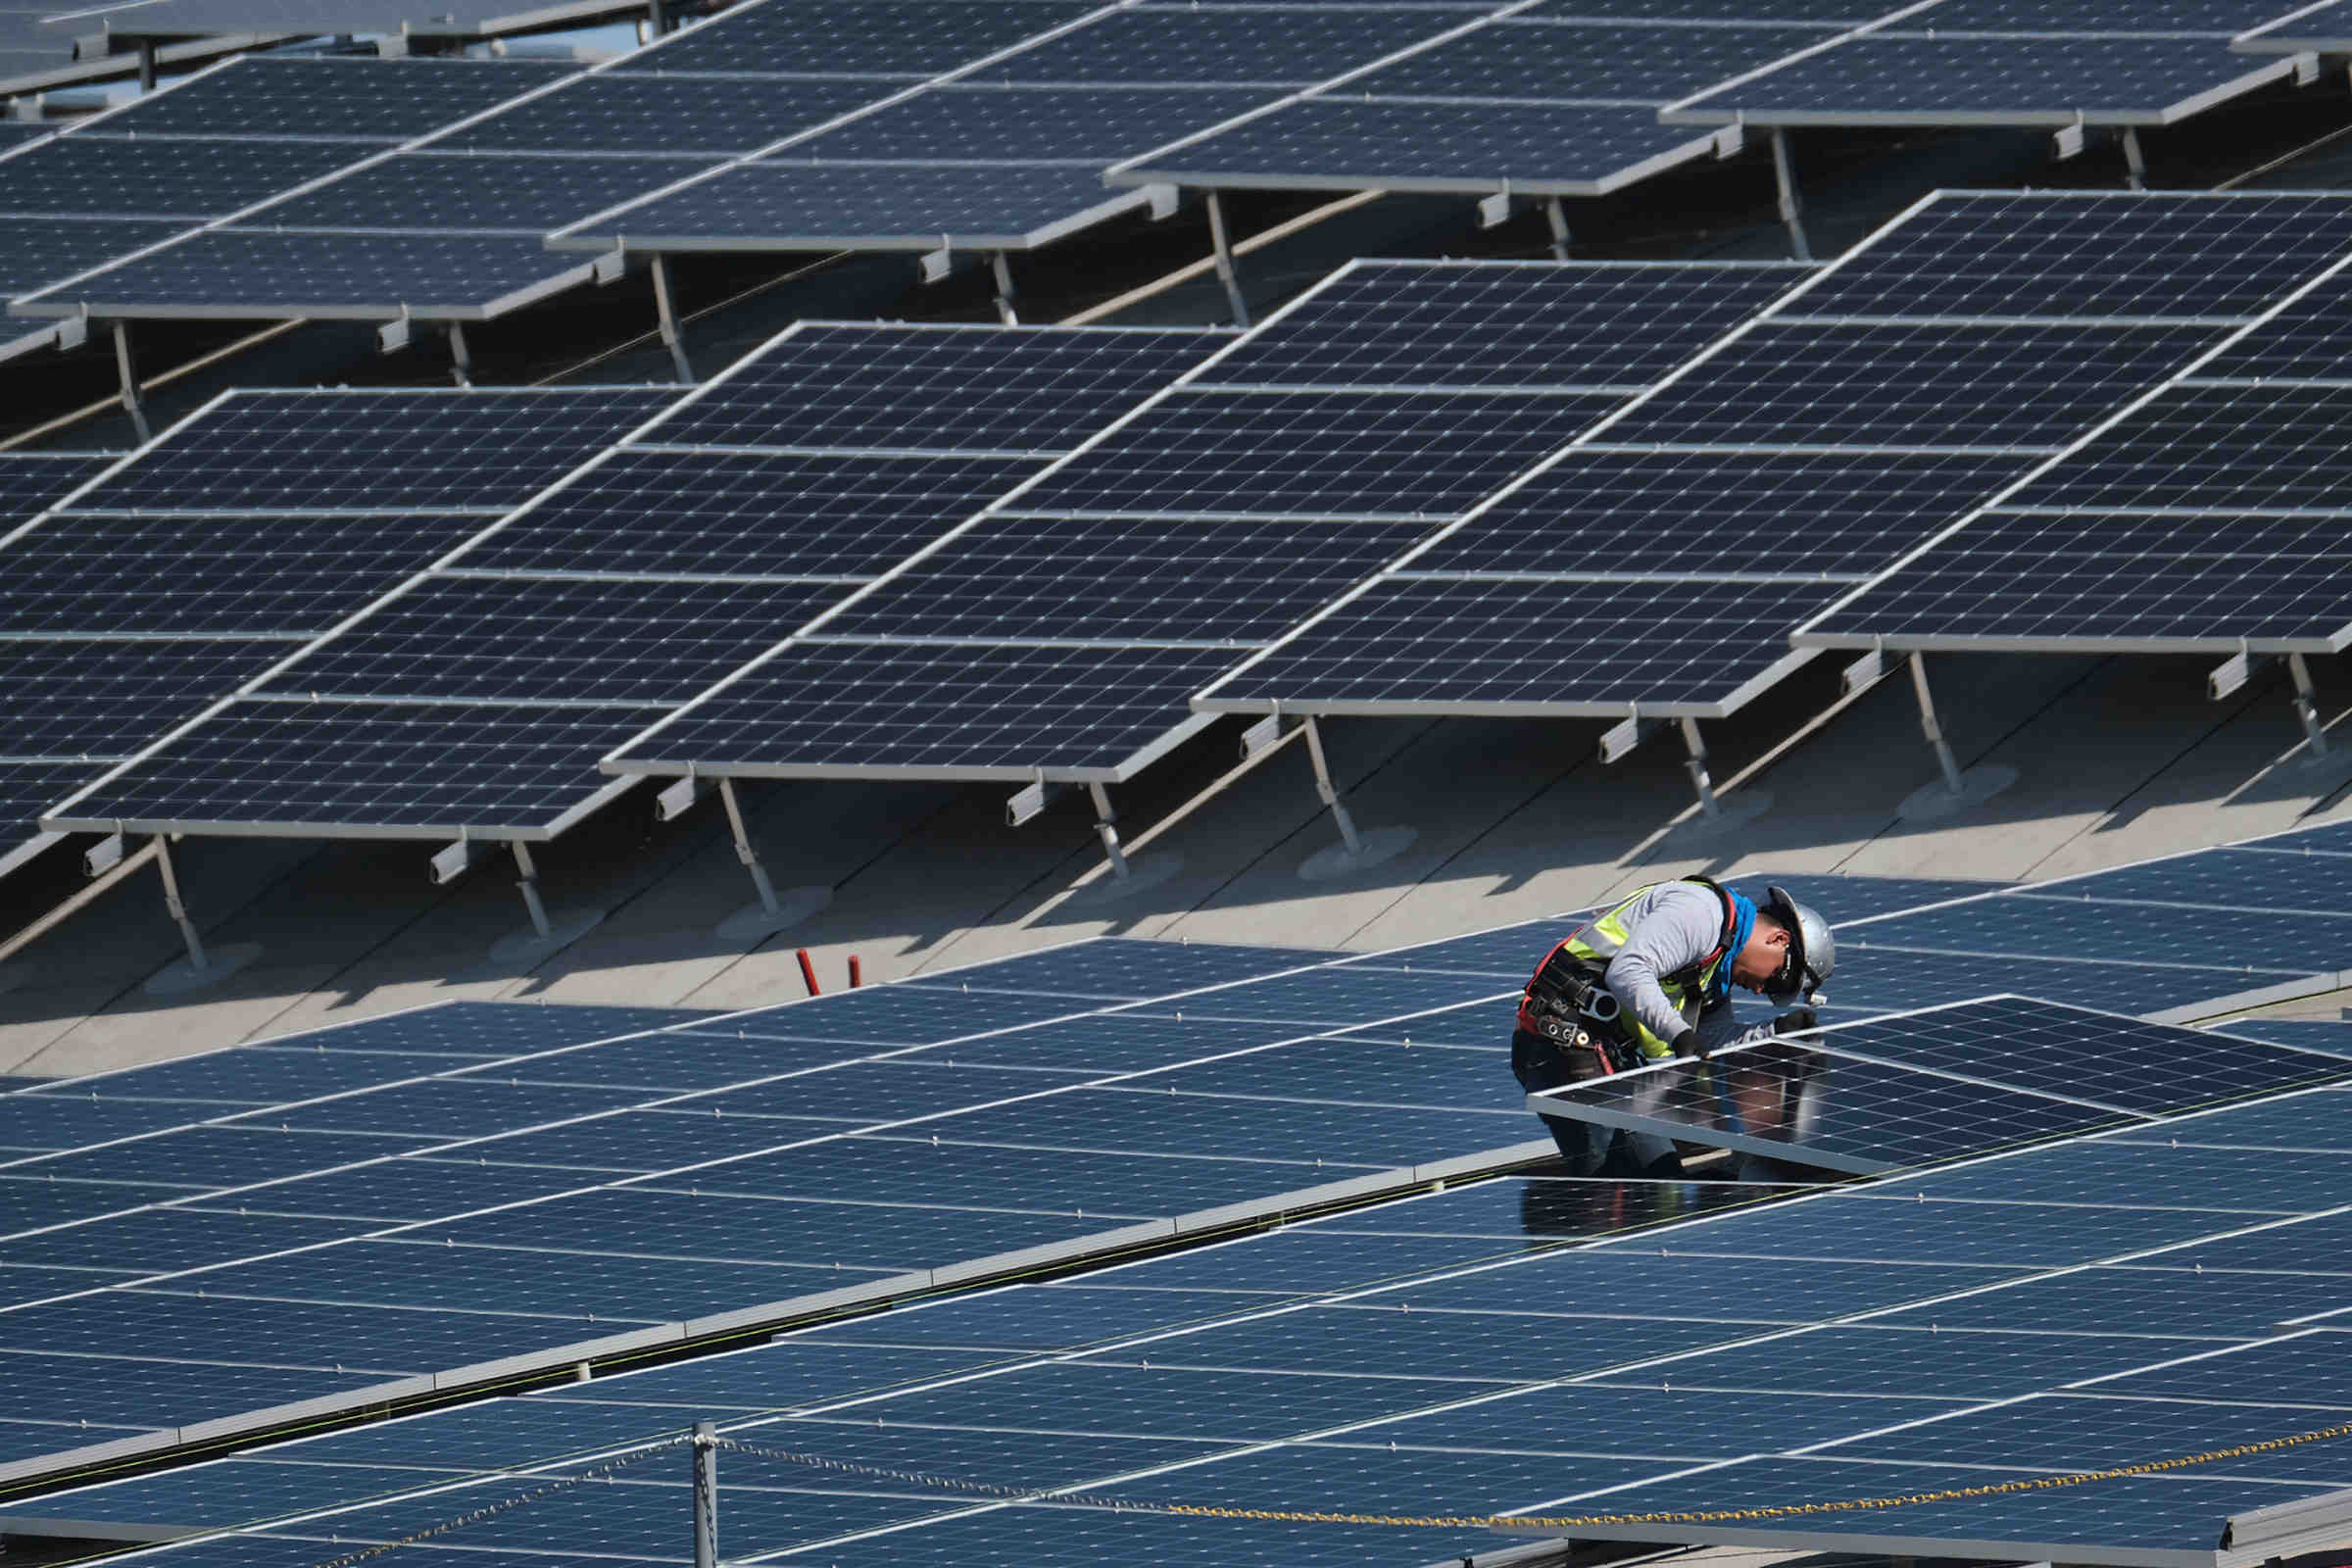 How is solar energy helping the world?